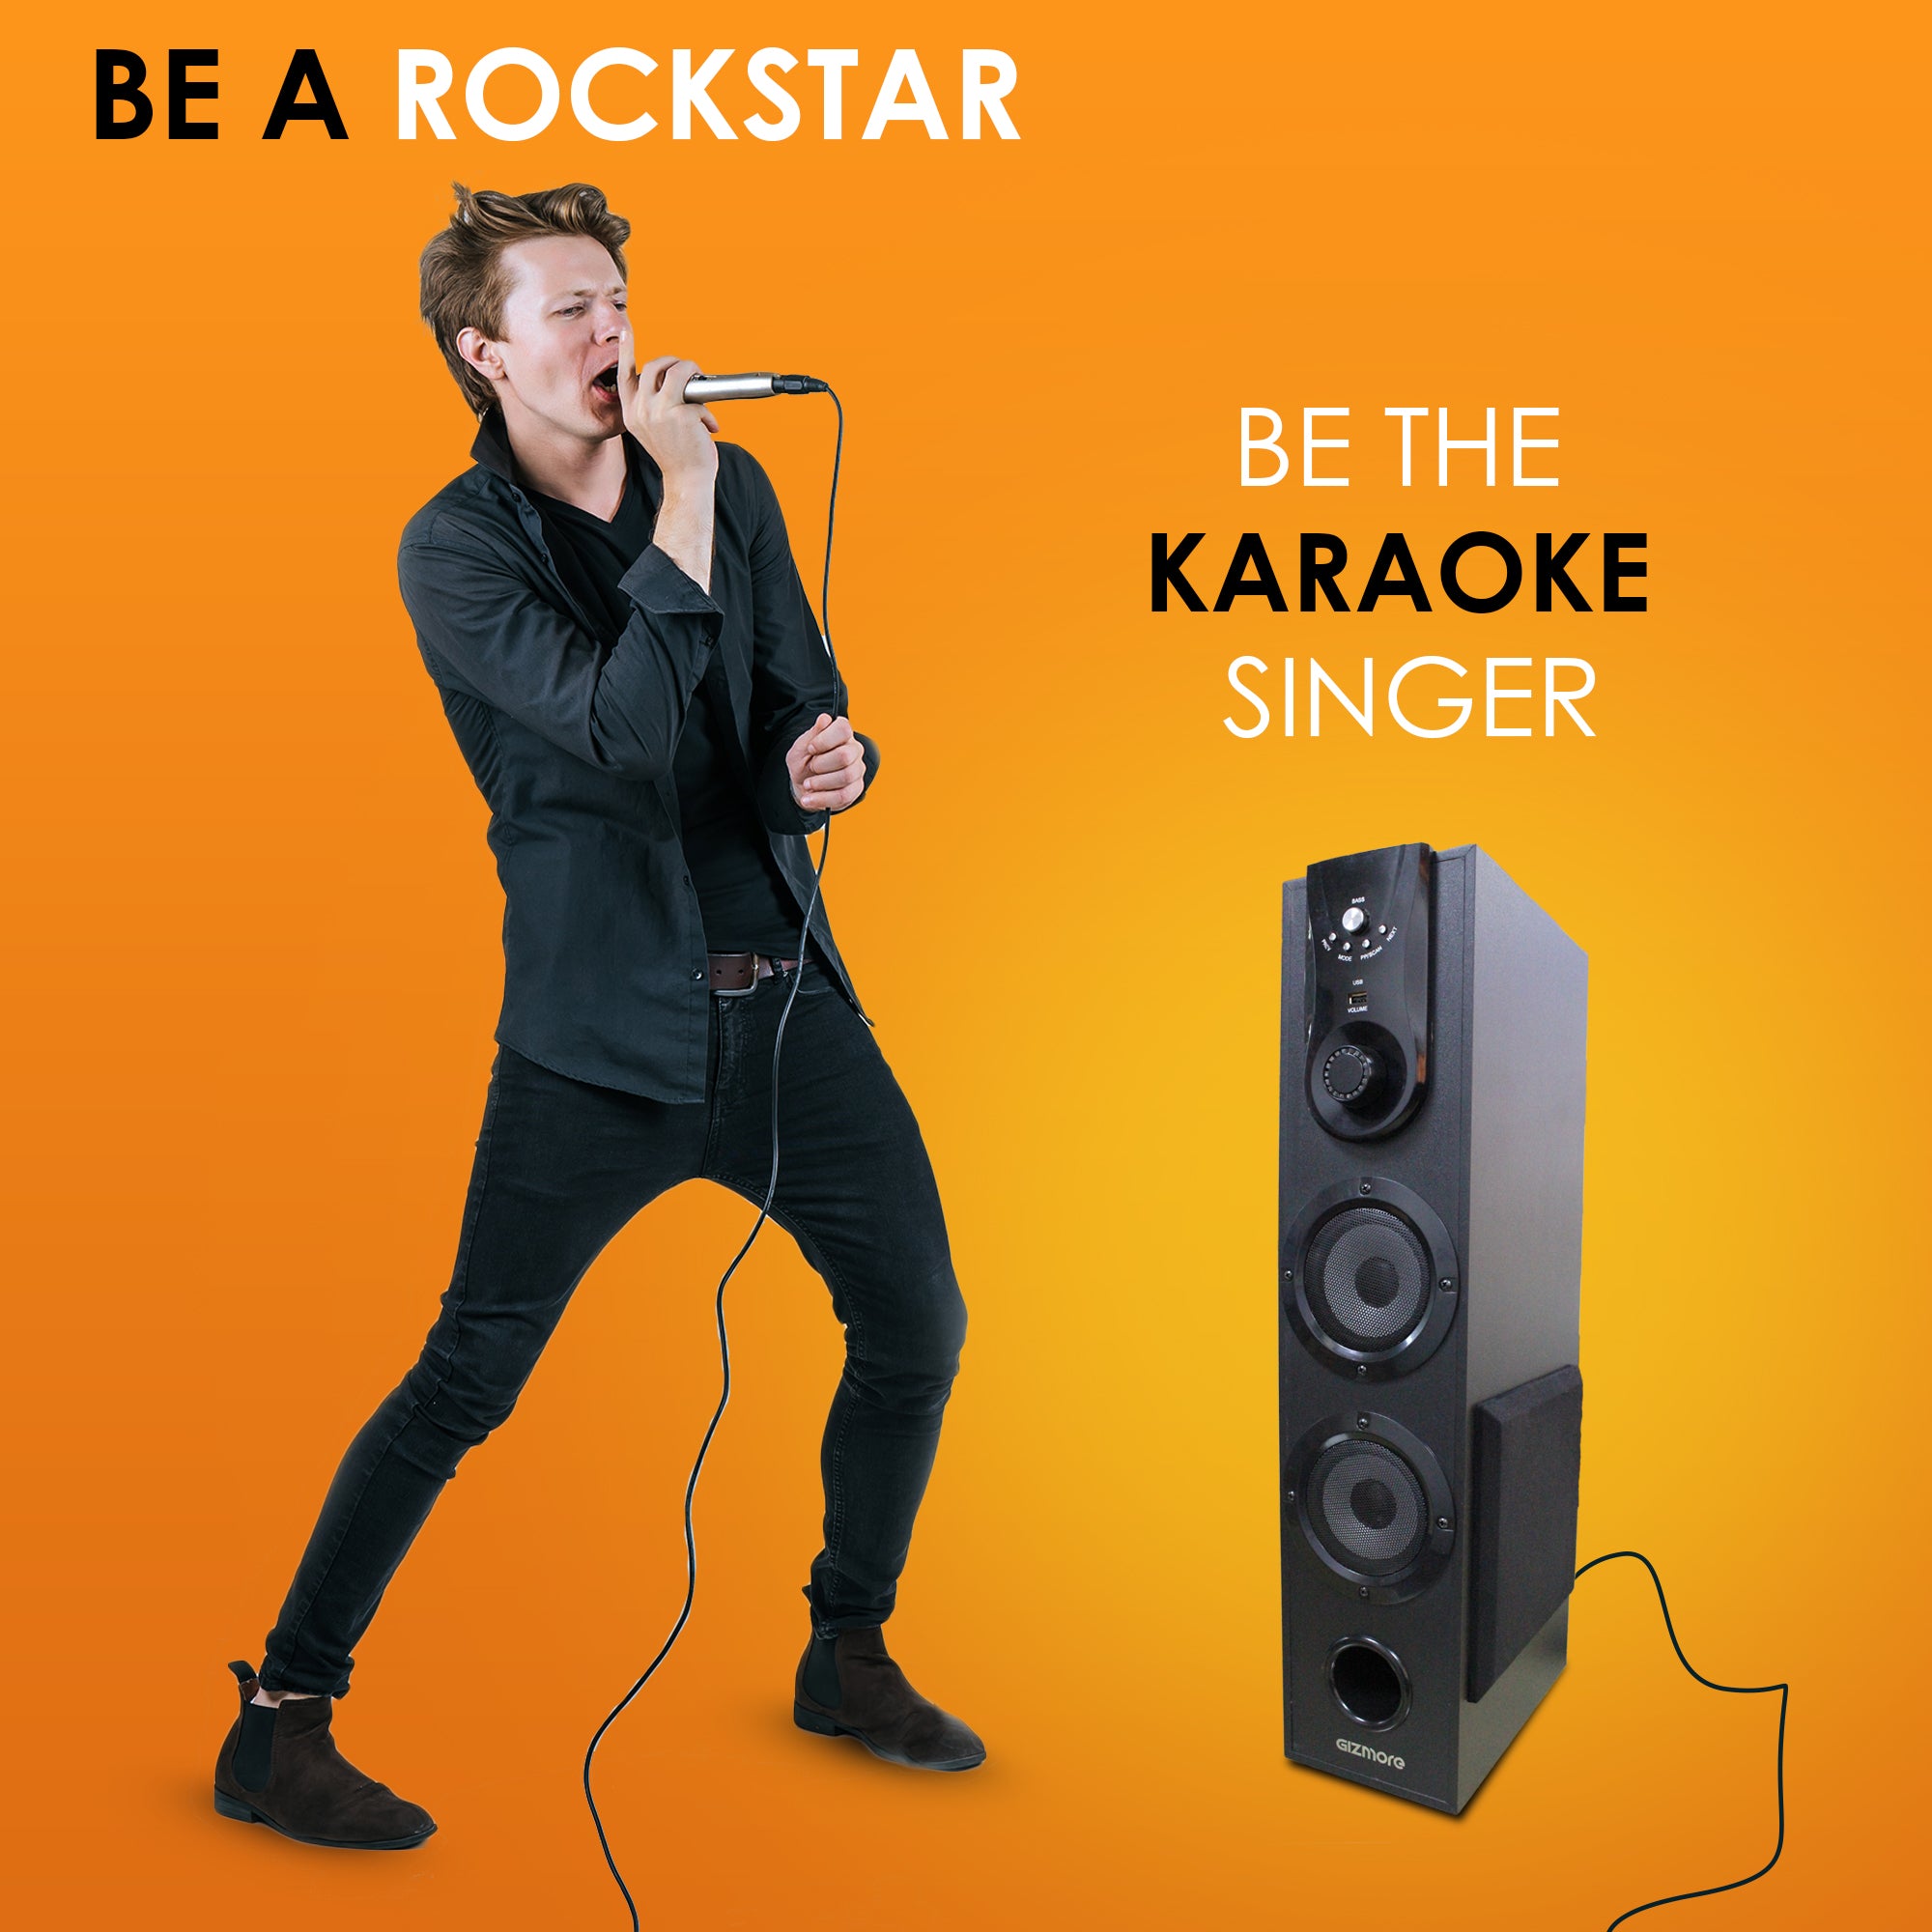 GIZMORE ST5000 50W Bluetooth Tower Speaker | Digital LED Display Wooden Cabinet | Volume & Bass Control | Karaoke and Party Speaker with Multiple Connectivity and Wired MIC